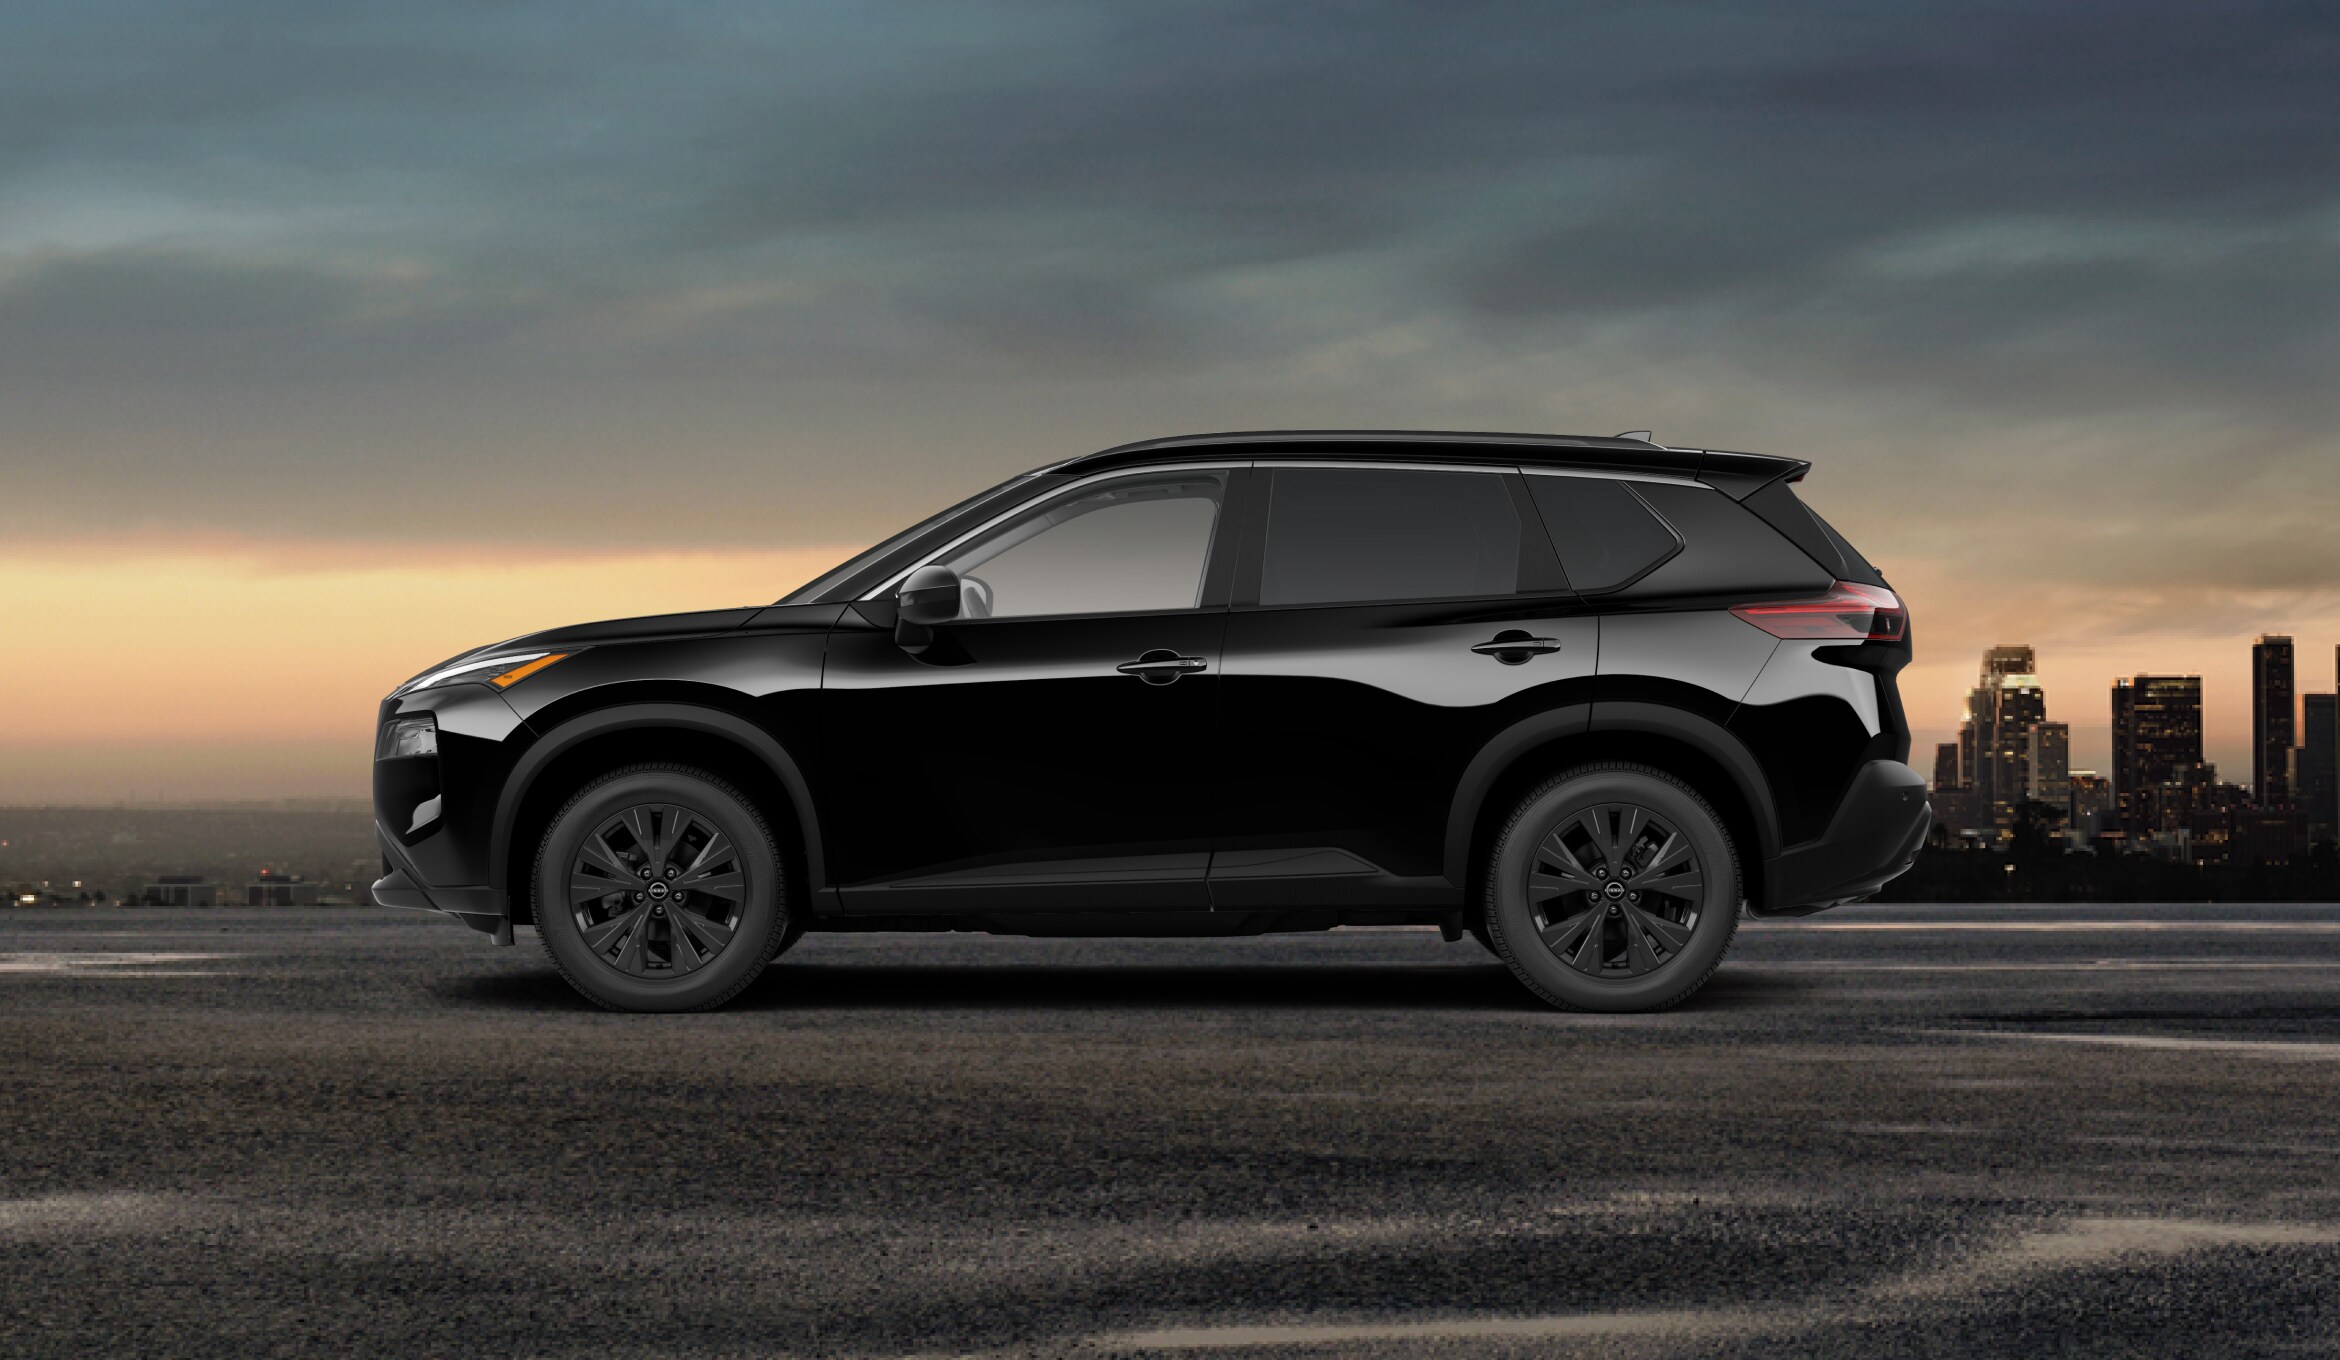 2023 Nissan Rogue Midnight Edition presented in a sleek black side view.